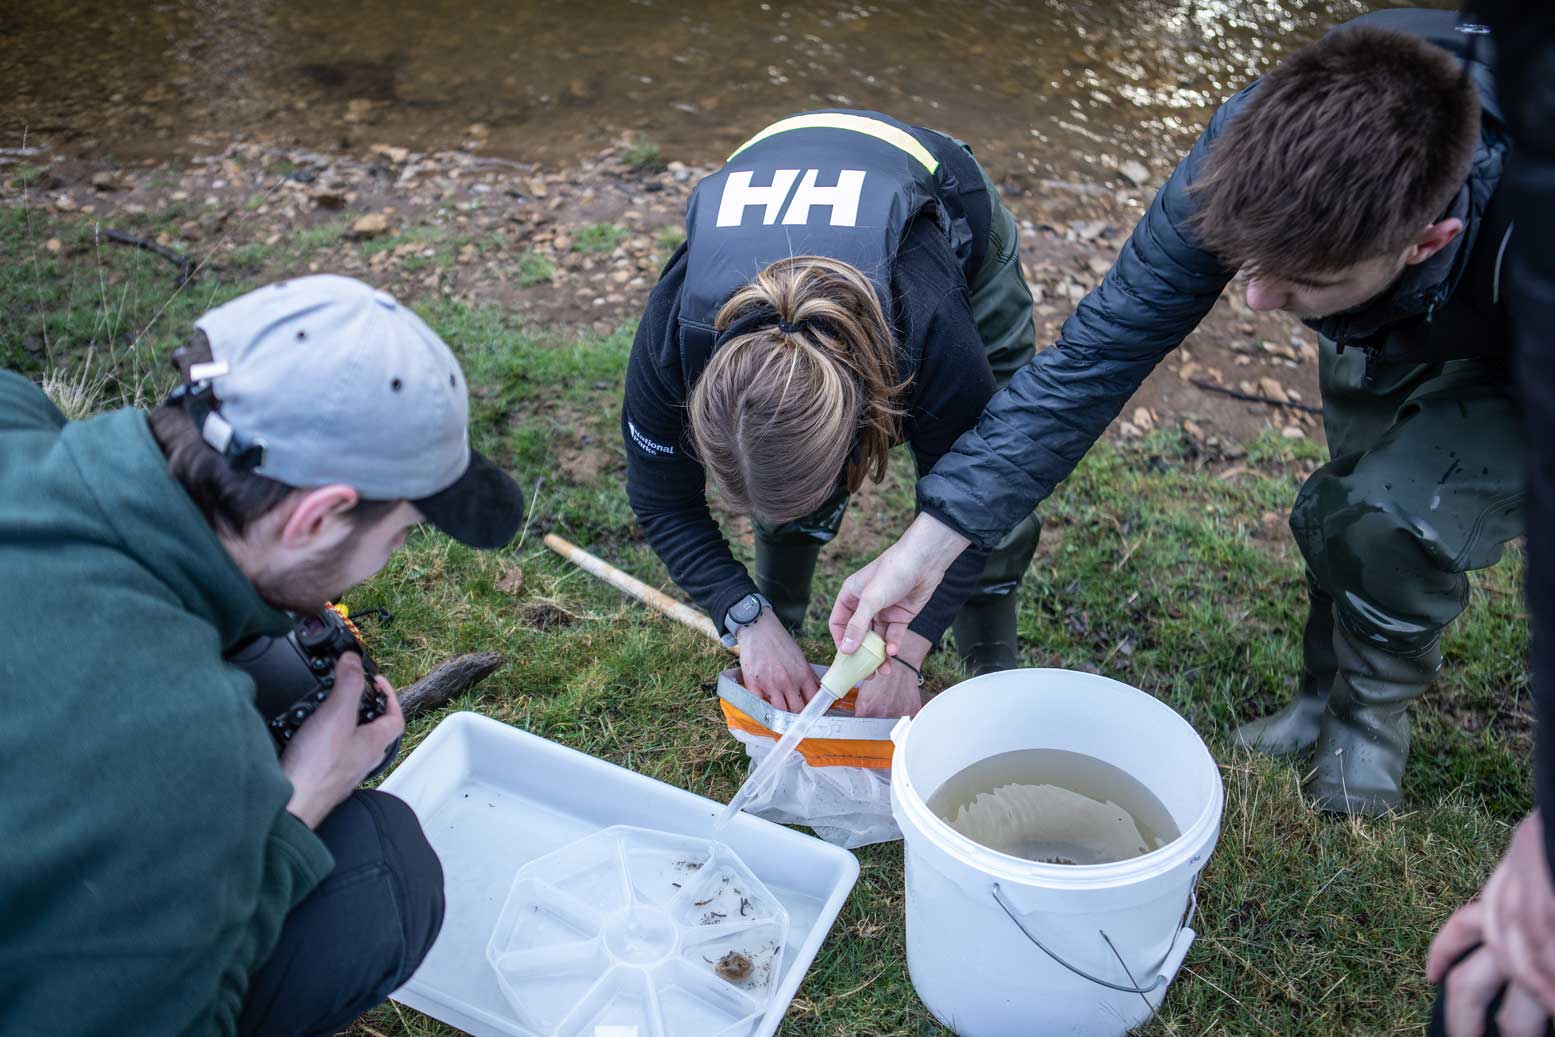 Group of people inspecting the contents of a white tray as part of a riverfly survey. Credit Charlie Fox.